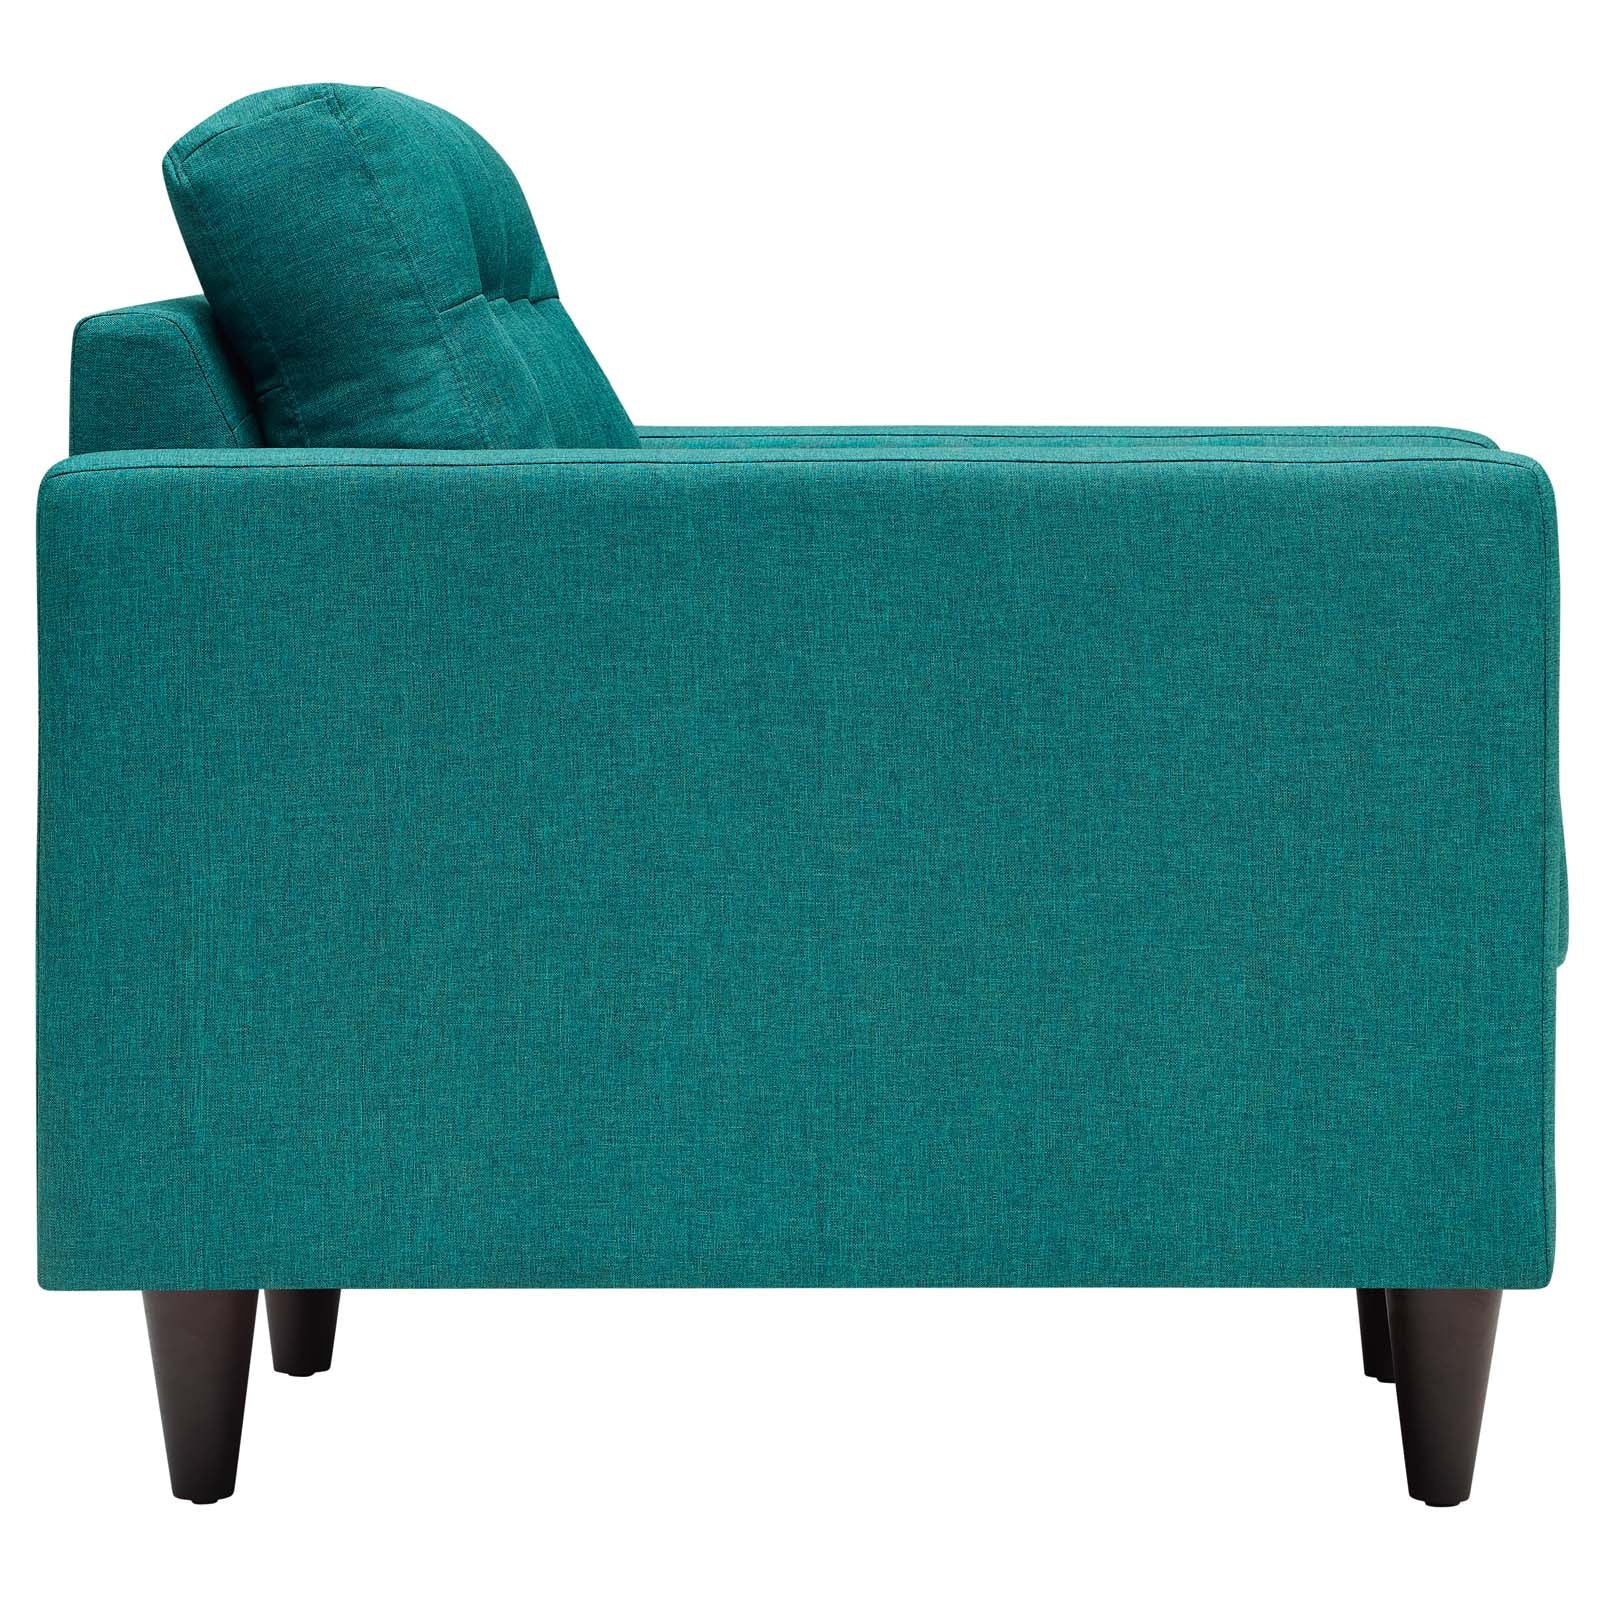 Modway Living Room Sets - Empress Armchair Upholstered Fabric Set of 2 Teal